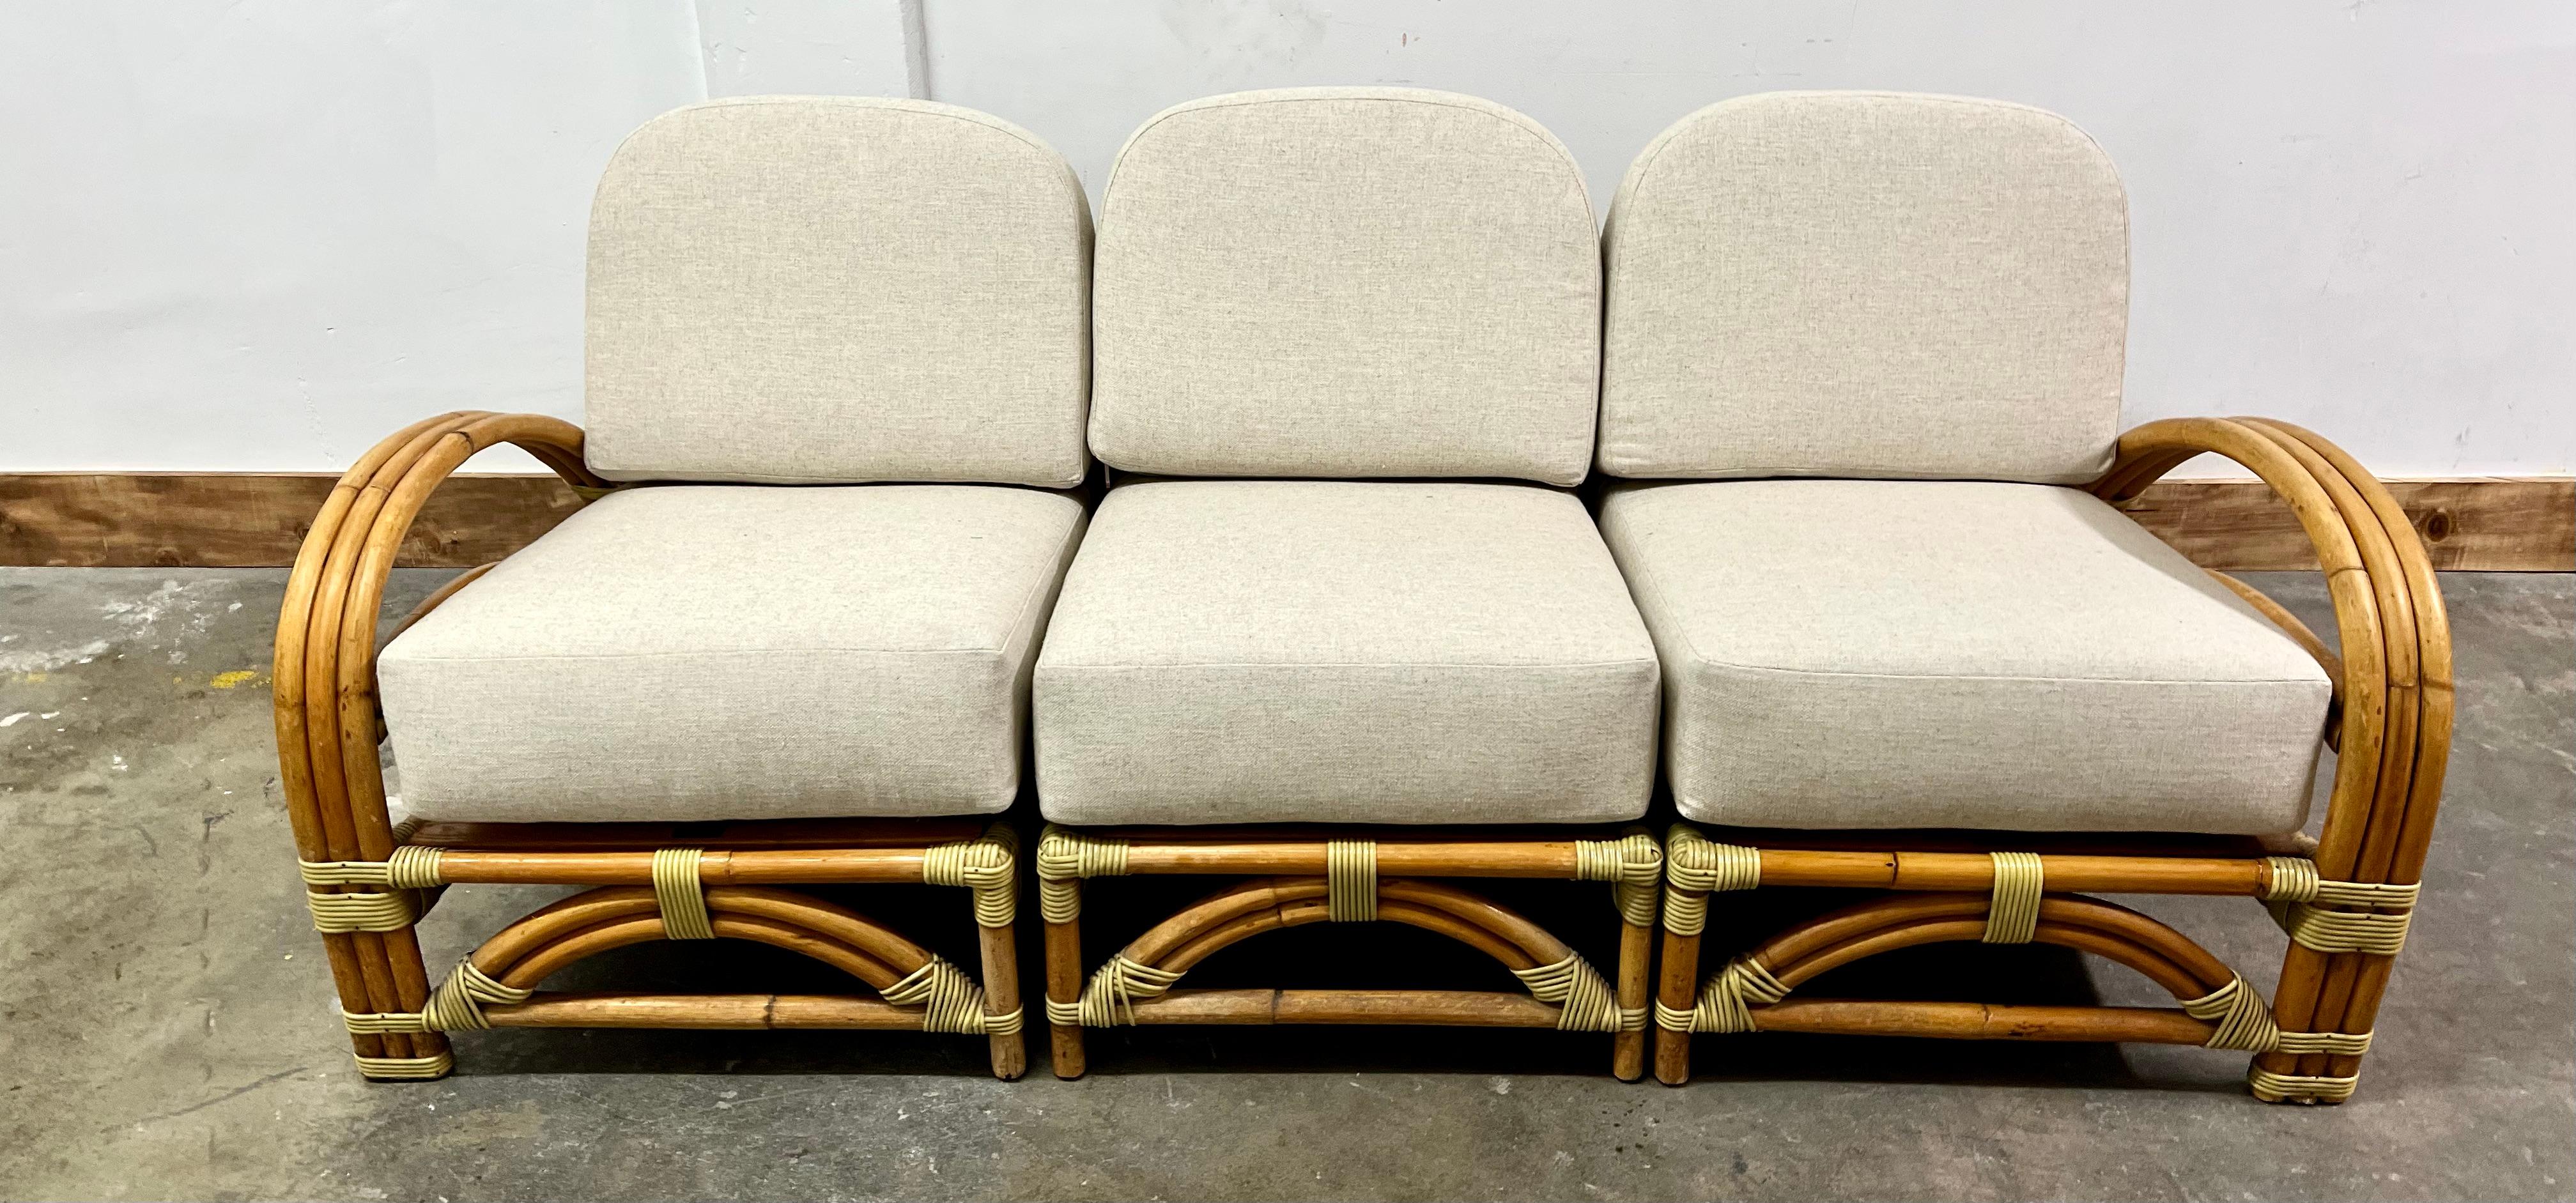 Ritts and Co. Rattan sofa with new raw cotton upholstery. The sofas comes in three sections that are independent but form a lovely Sofa. Ritts and Co. produced wonderful and iconic mid century pieces, from acrylic to Rattan... their pieces stand